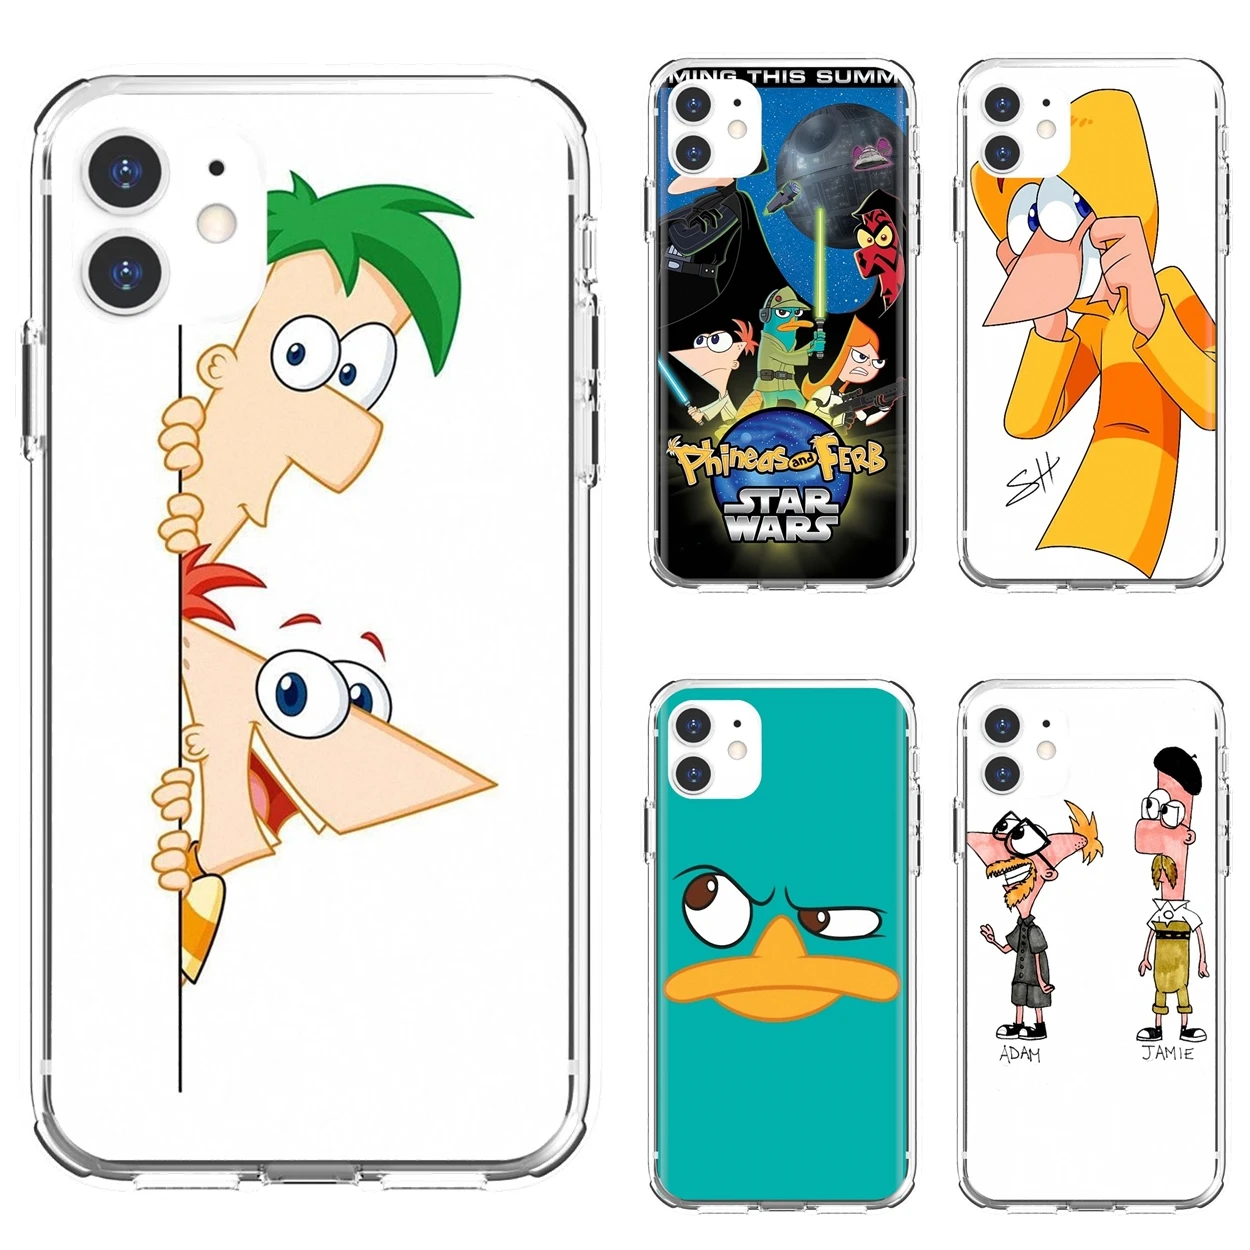 11 cases For iPhone 10 11 12 13 Mini Pro 4S 5S SE 5C 6 6S 7 8 X XR XS Plus Max 2020 Soft Shell Cases Elegant-Phineas-And-Ferb-Star-Wars iphone xr phone case